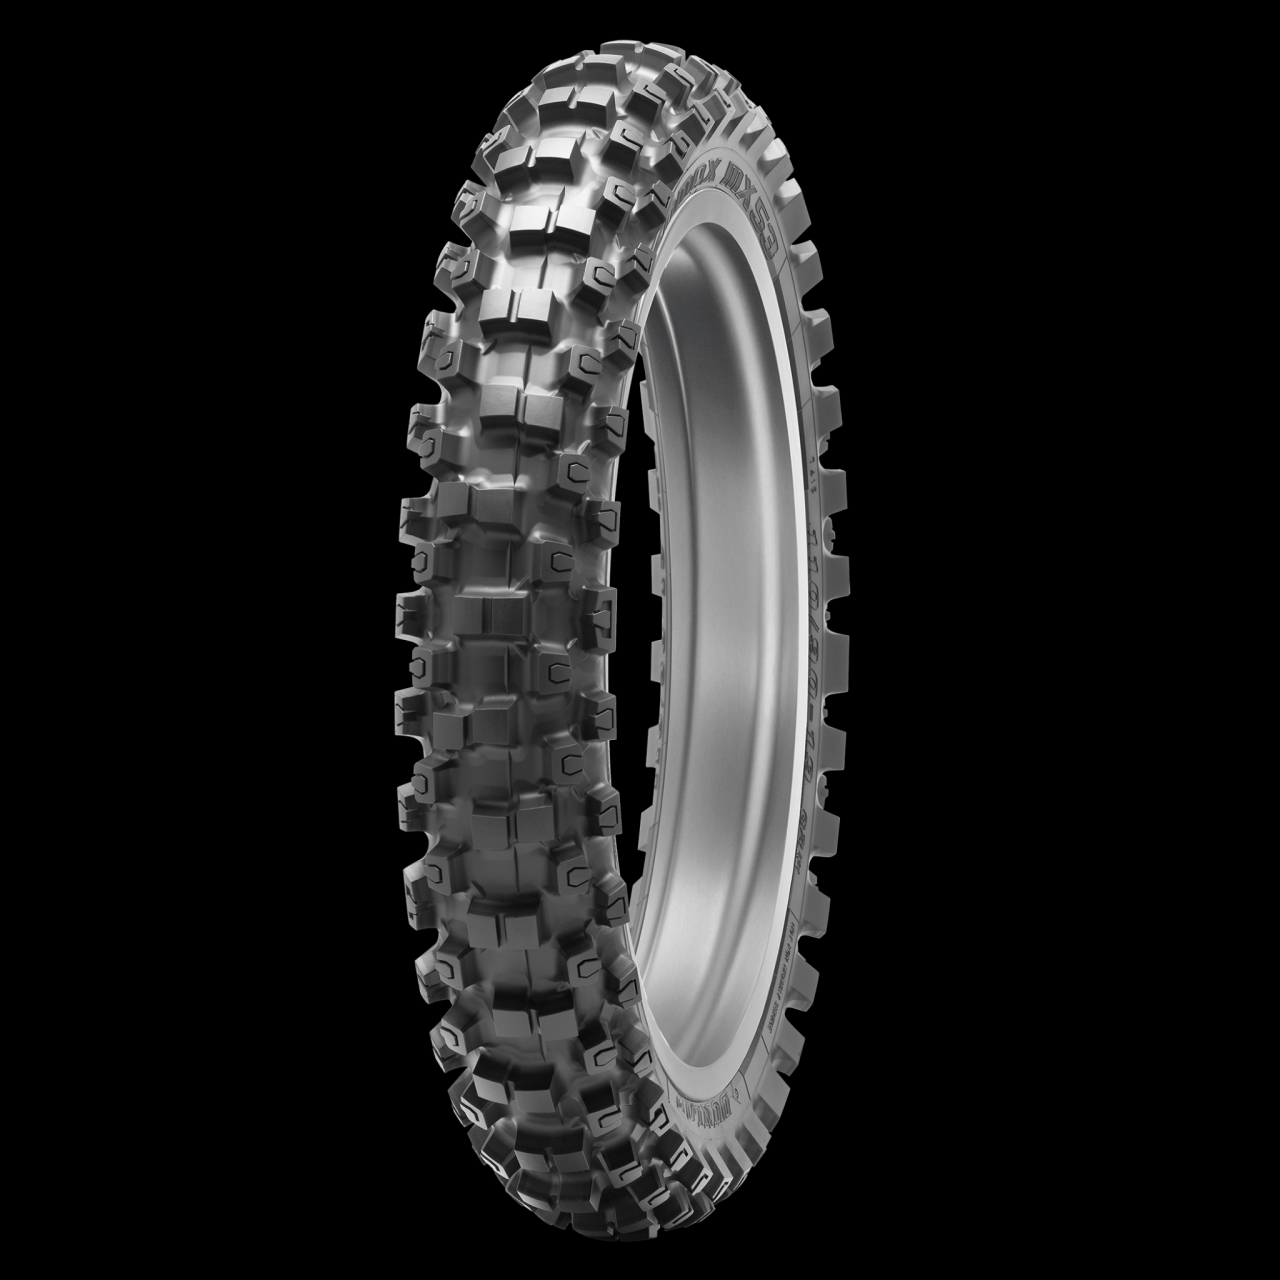 Off-Road / MX / SX Tires | Dunlop Motorcycle Tires